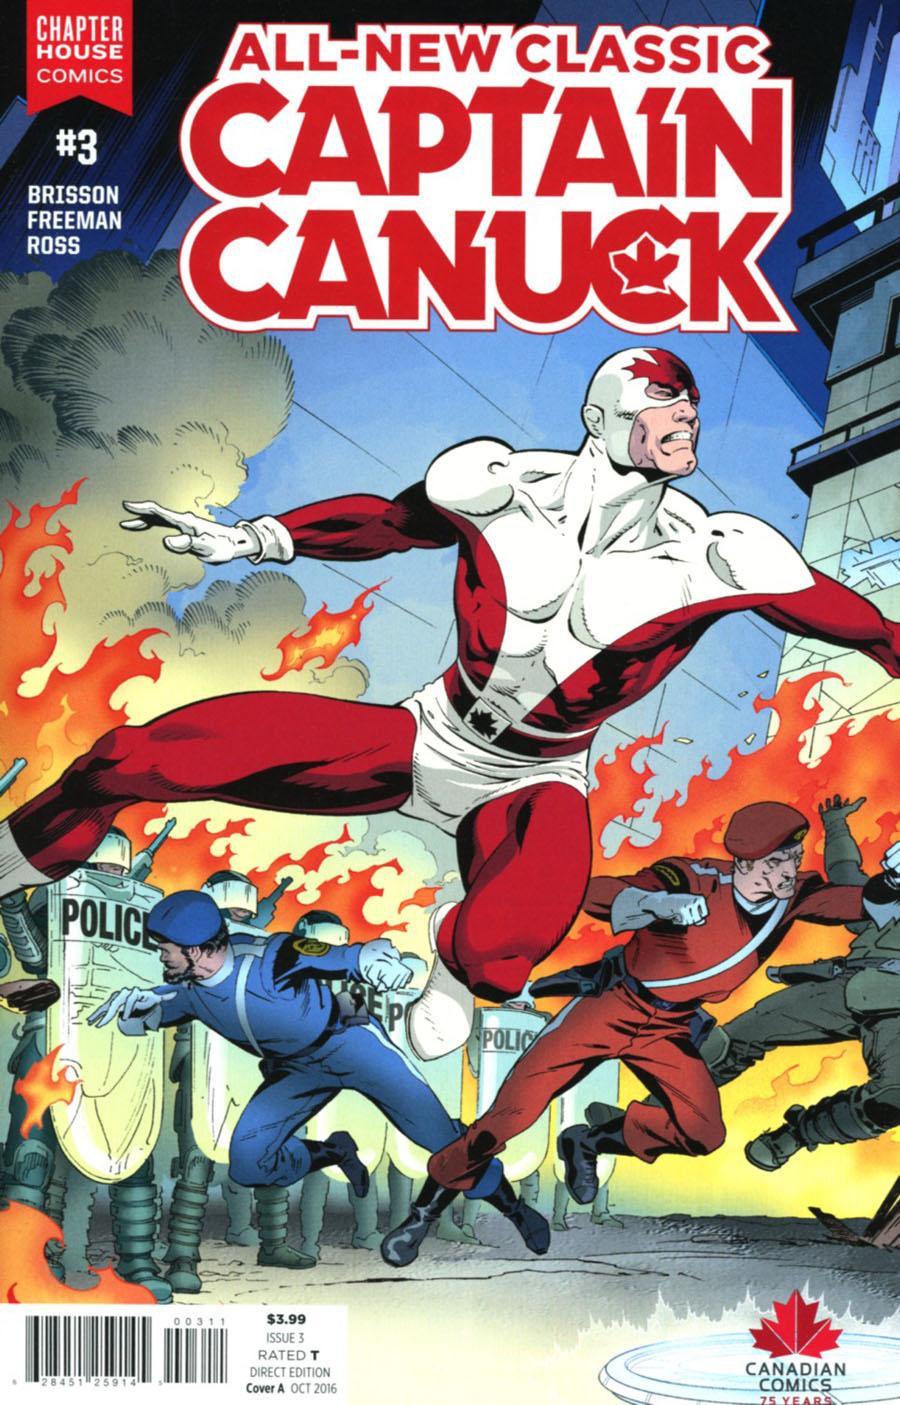 All-New Classic Captain Canuck Vol. 1 #3